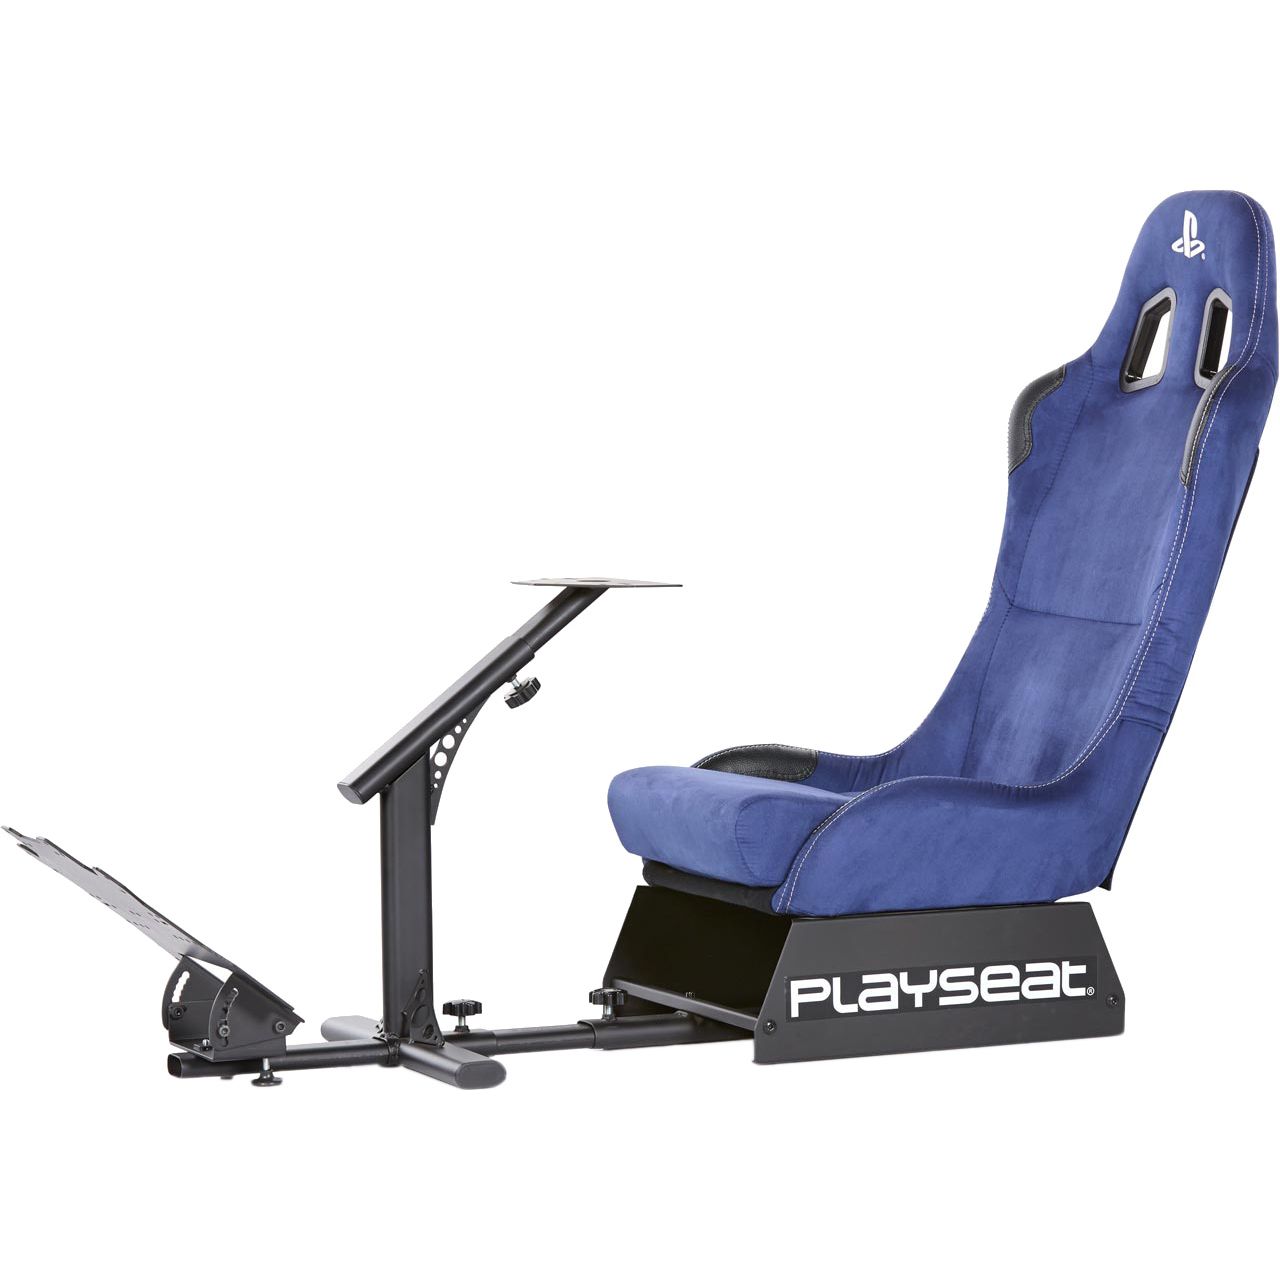 sony gaming chair